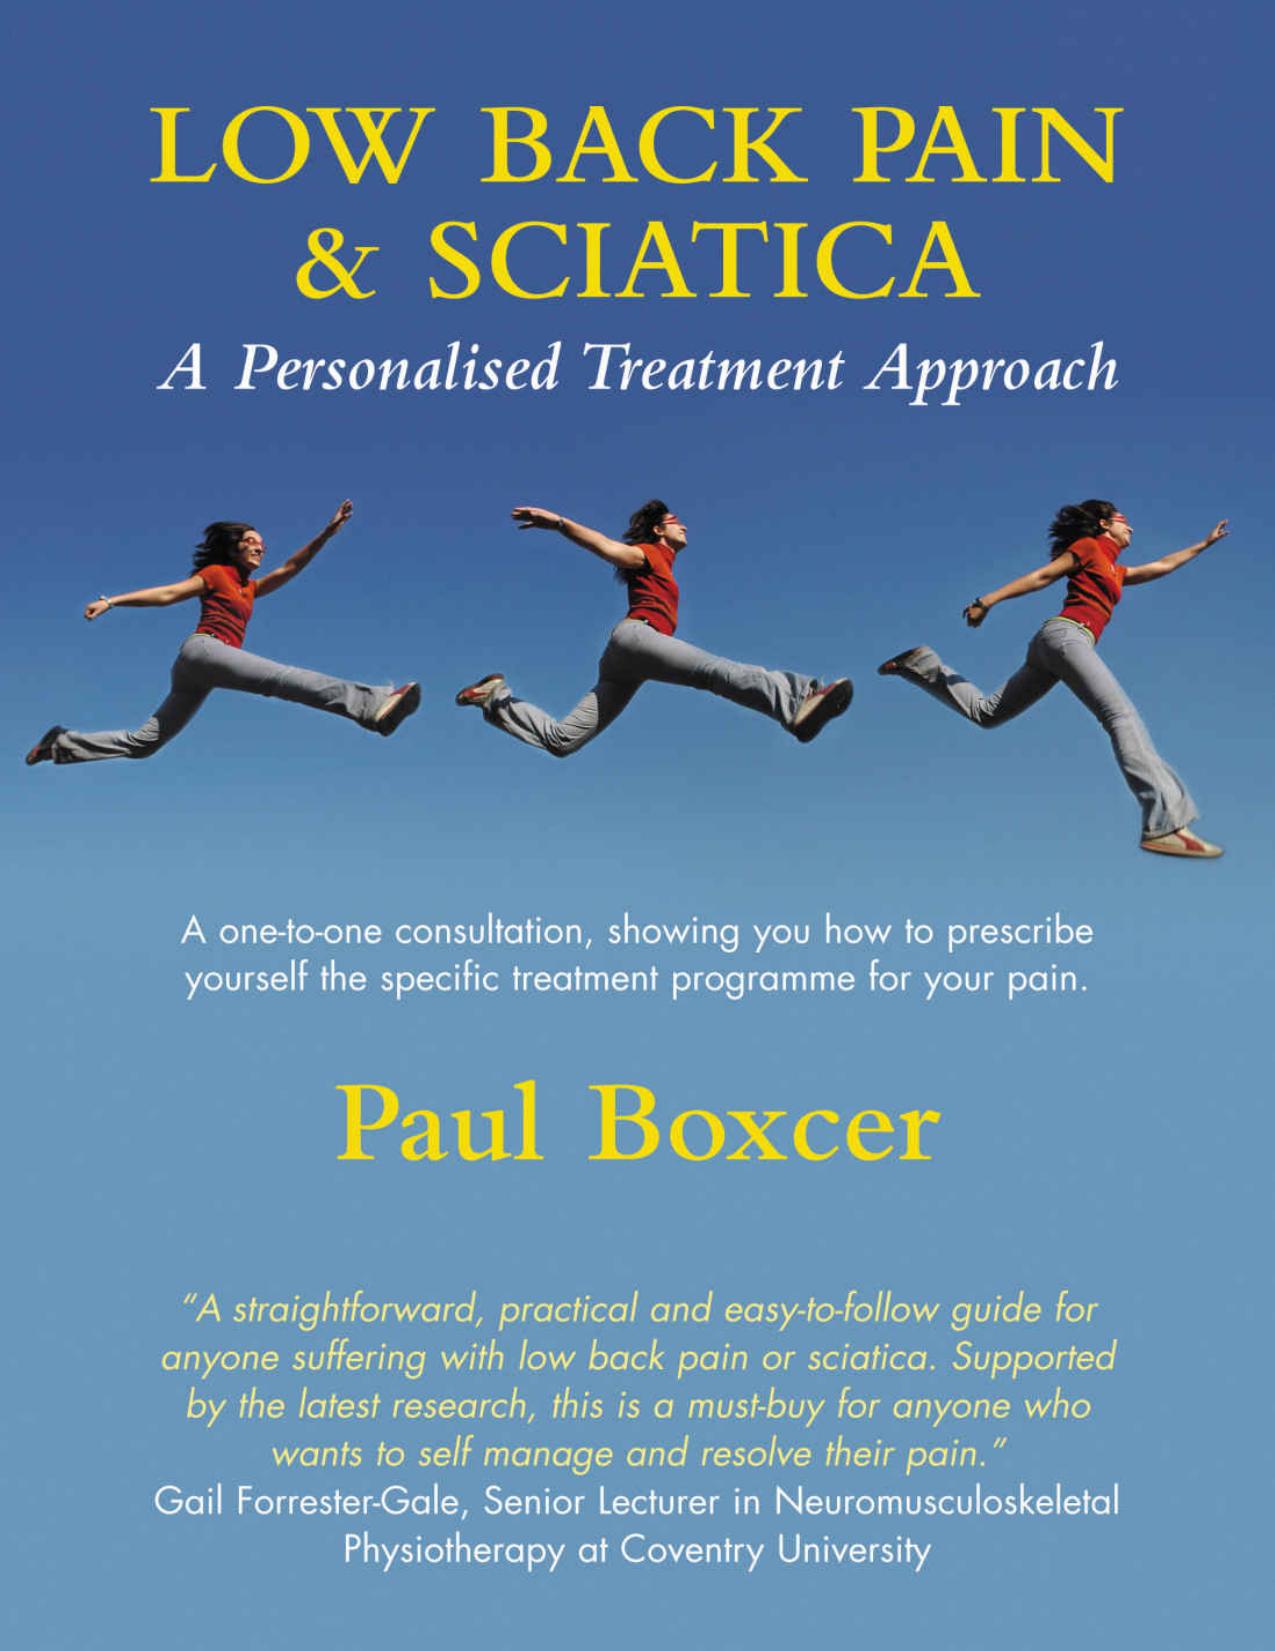 Low Back Pain & Sciatica - A Personalised Treatment Approach by Boxcer Paul